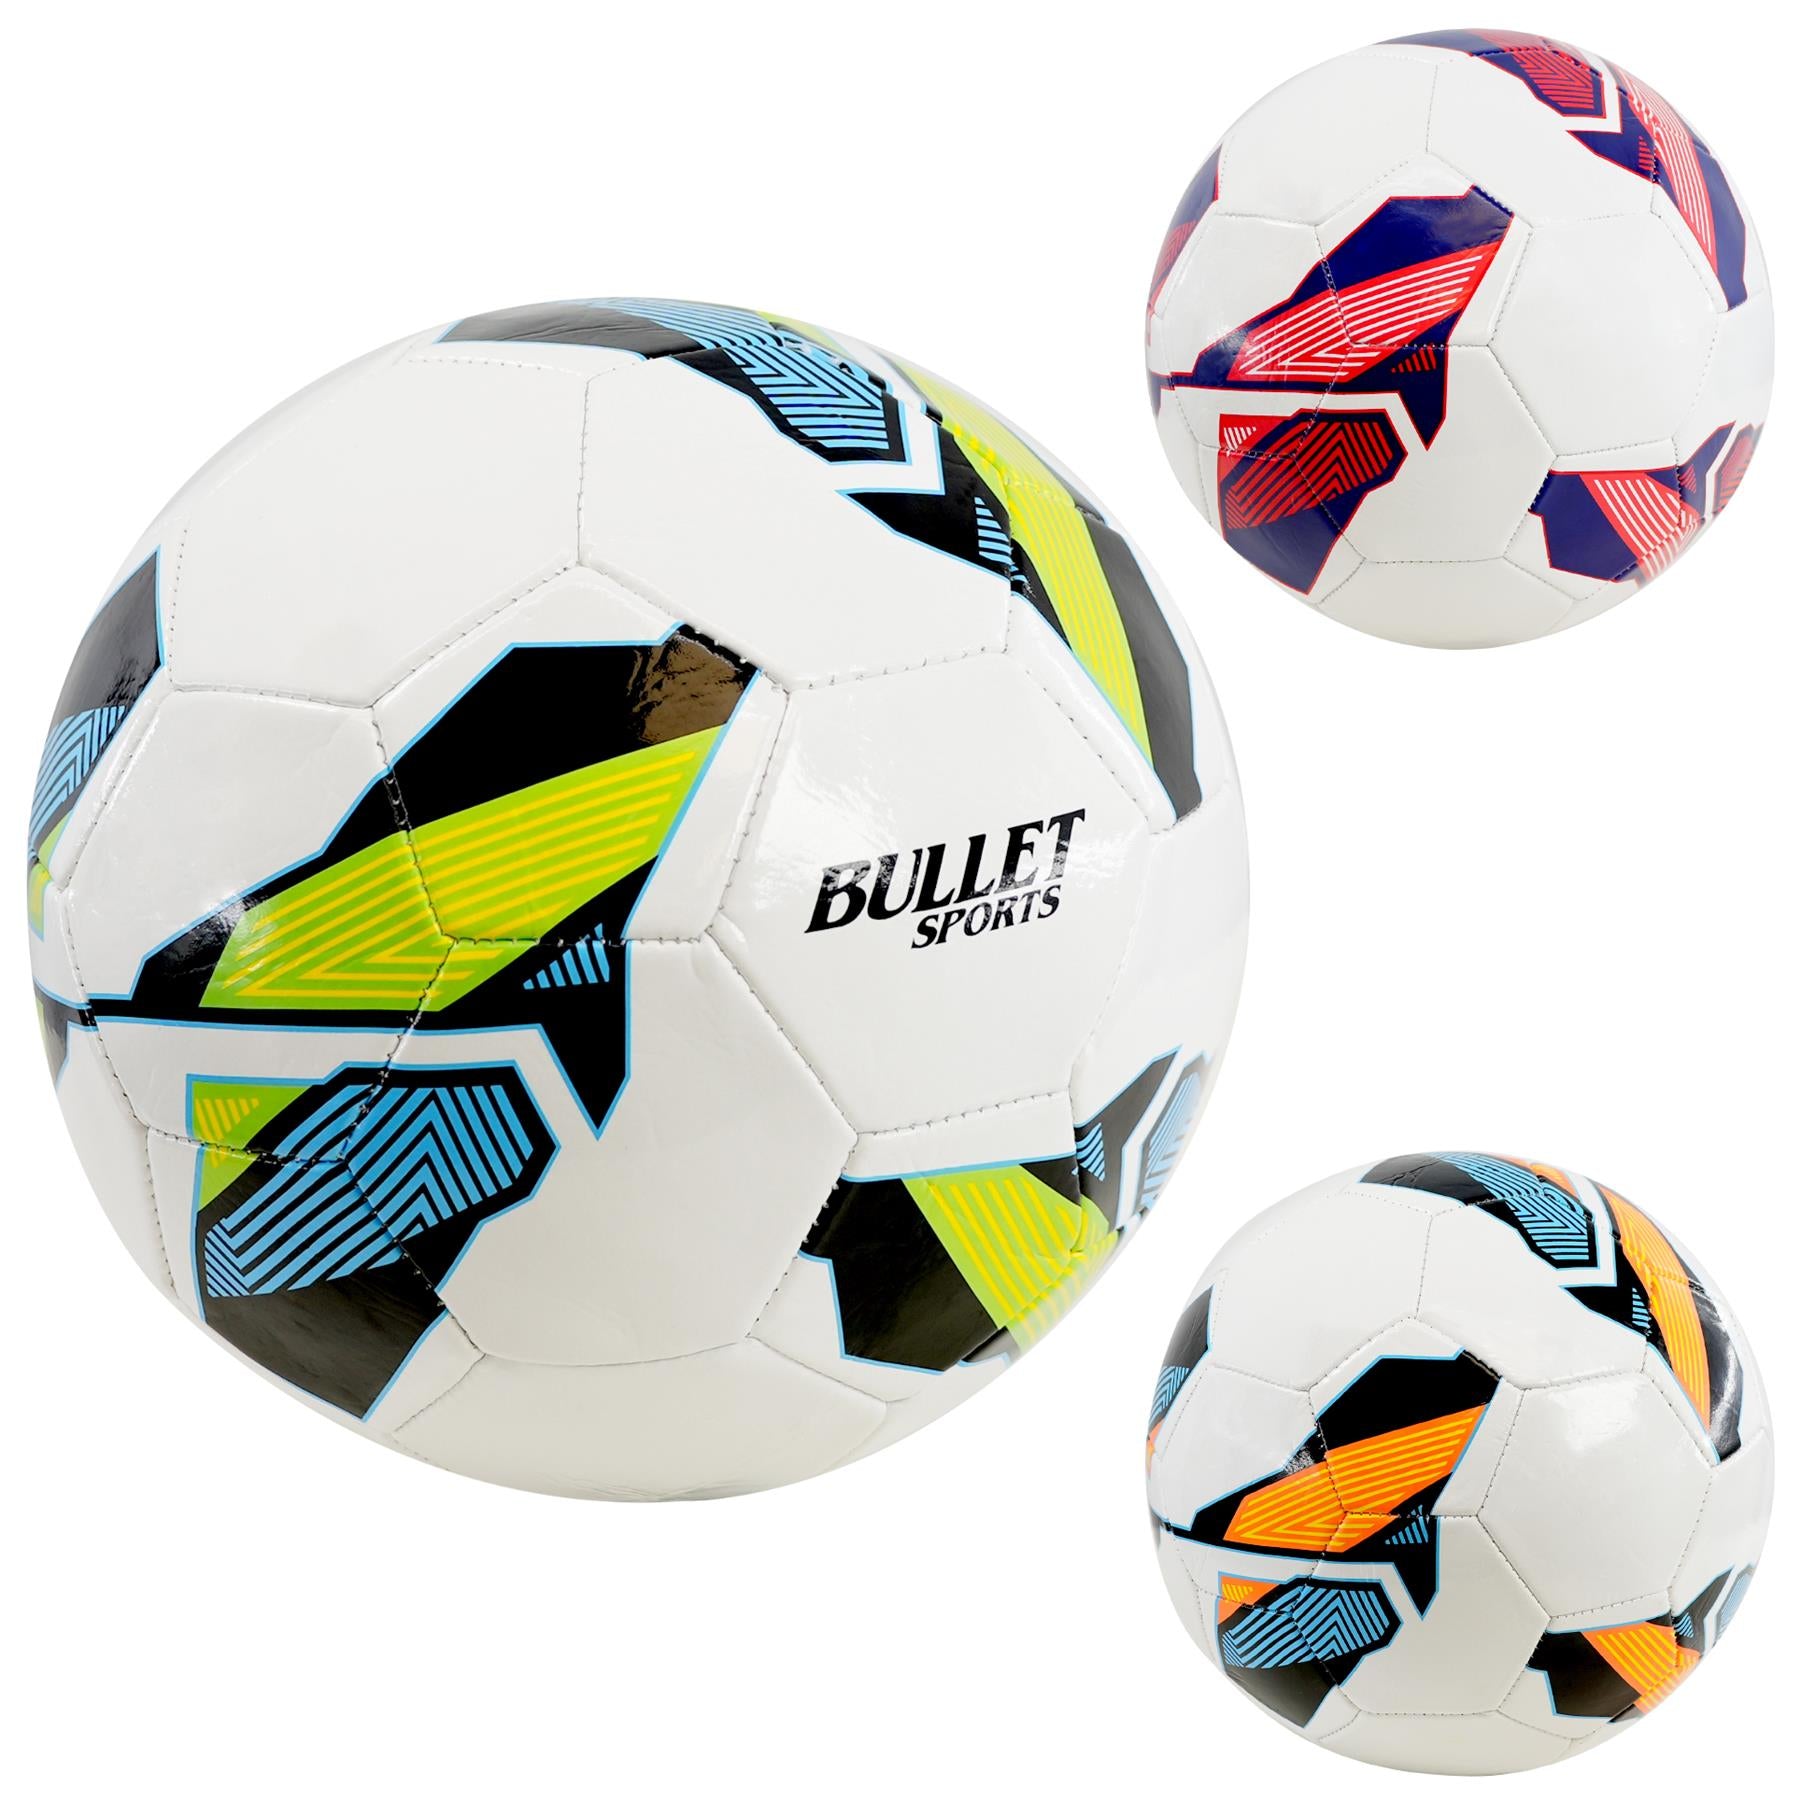 The Magic Toy Shop Football Ball Size 5